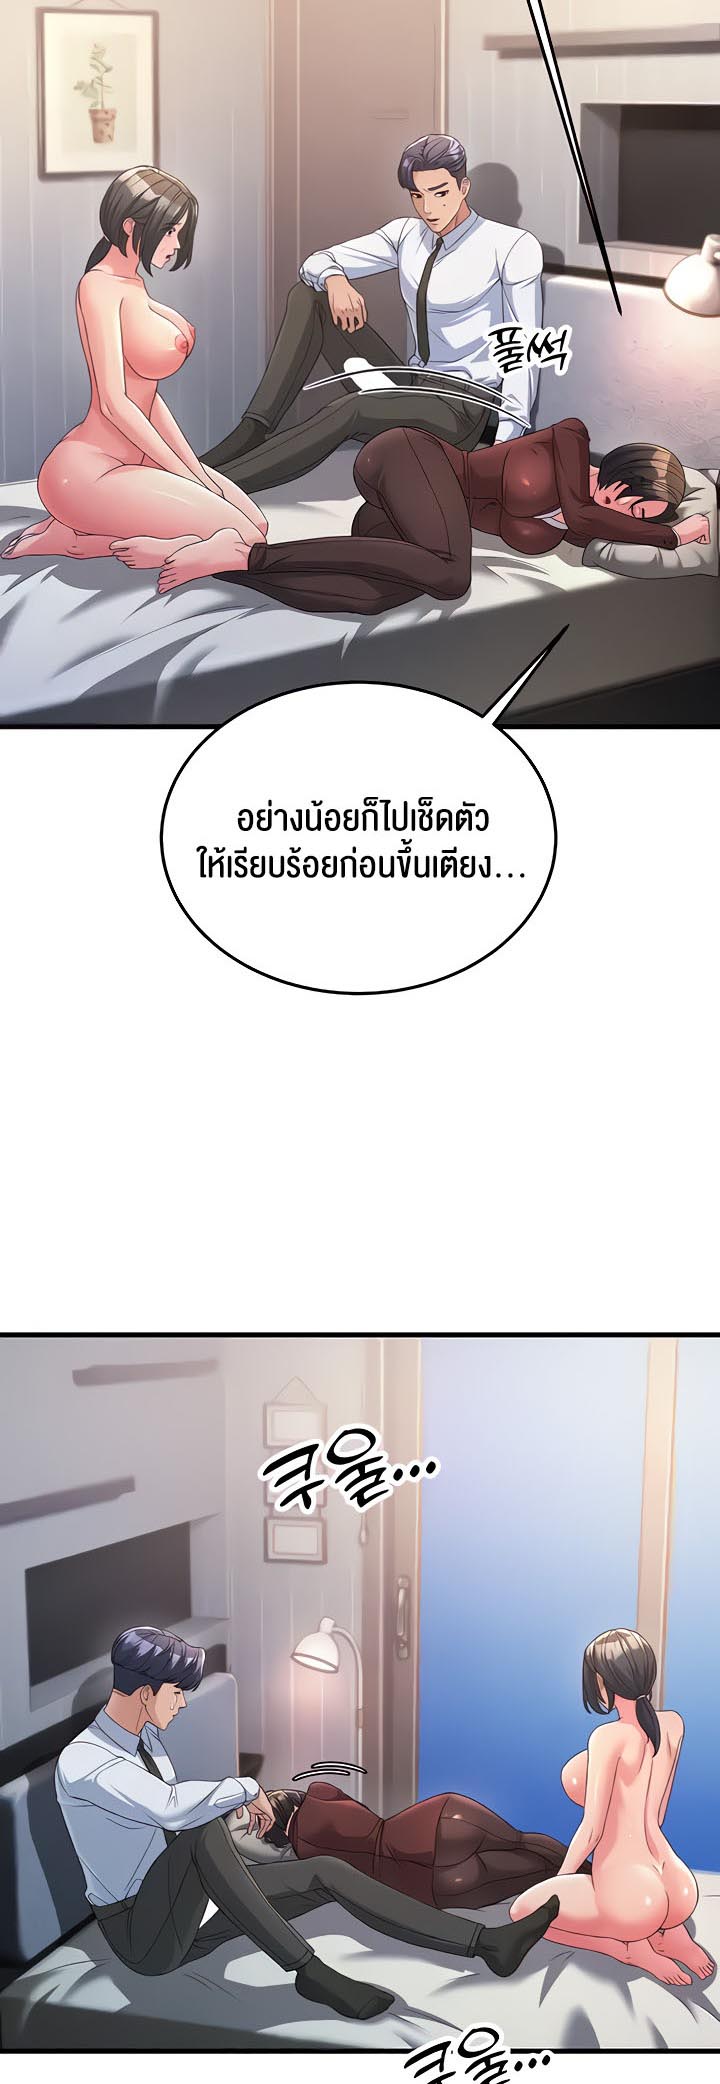 à¸­à¹ˆà¸²à¸™à¹‚à¸”à¸ˆà¸´à¸™ à¹€à¸£à¸·à¹ˆà¸­à¸‡ Mother in Law Bends To My Will 11 04